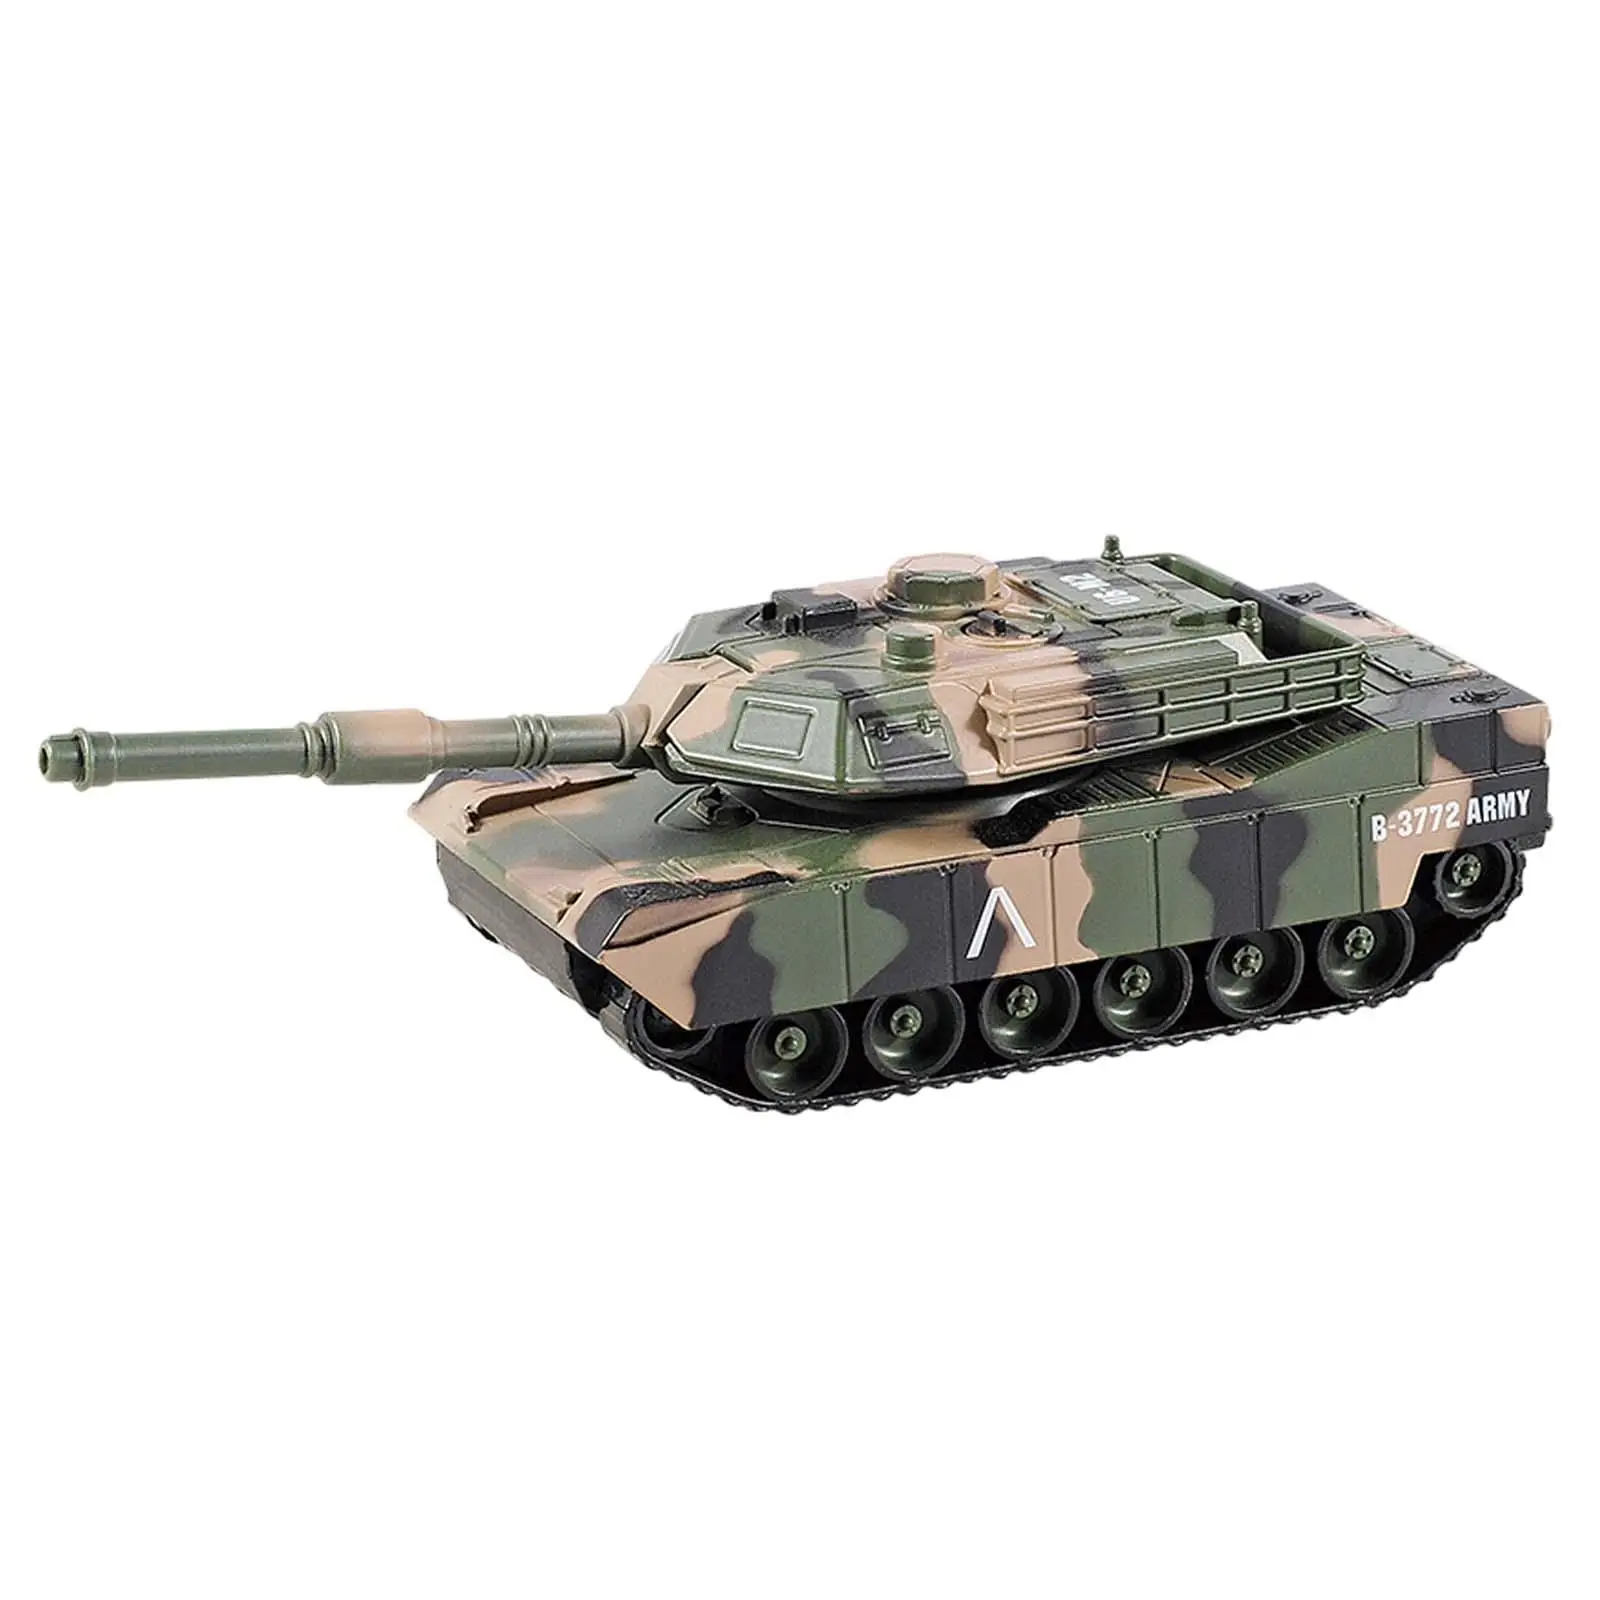 1:24 Tank Toy Educational Toys Vehicle with Light and Sound Vehicle Pull Back Tank Toy for Kids Girls Boys 3-7 Years Old Gift